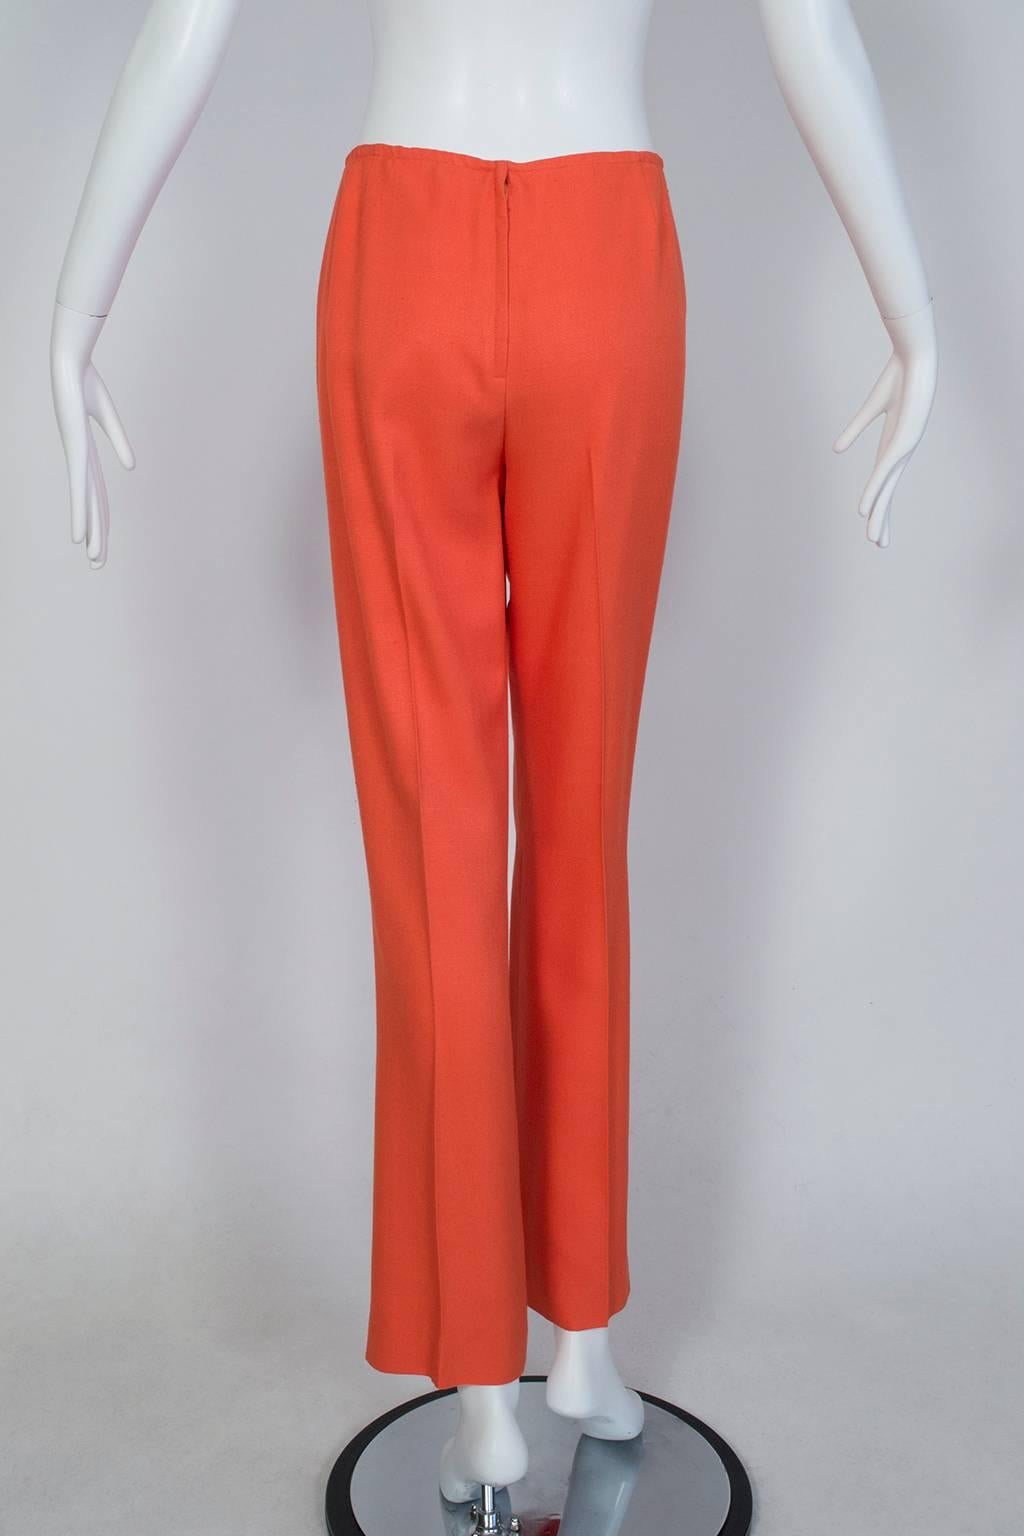 Documented Pierre Cardin Plunging Hostess Dress and Skinny Pants - XS-S, 1970 For Sale 7